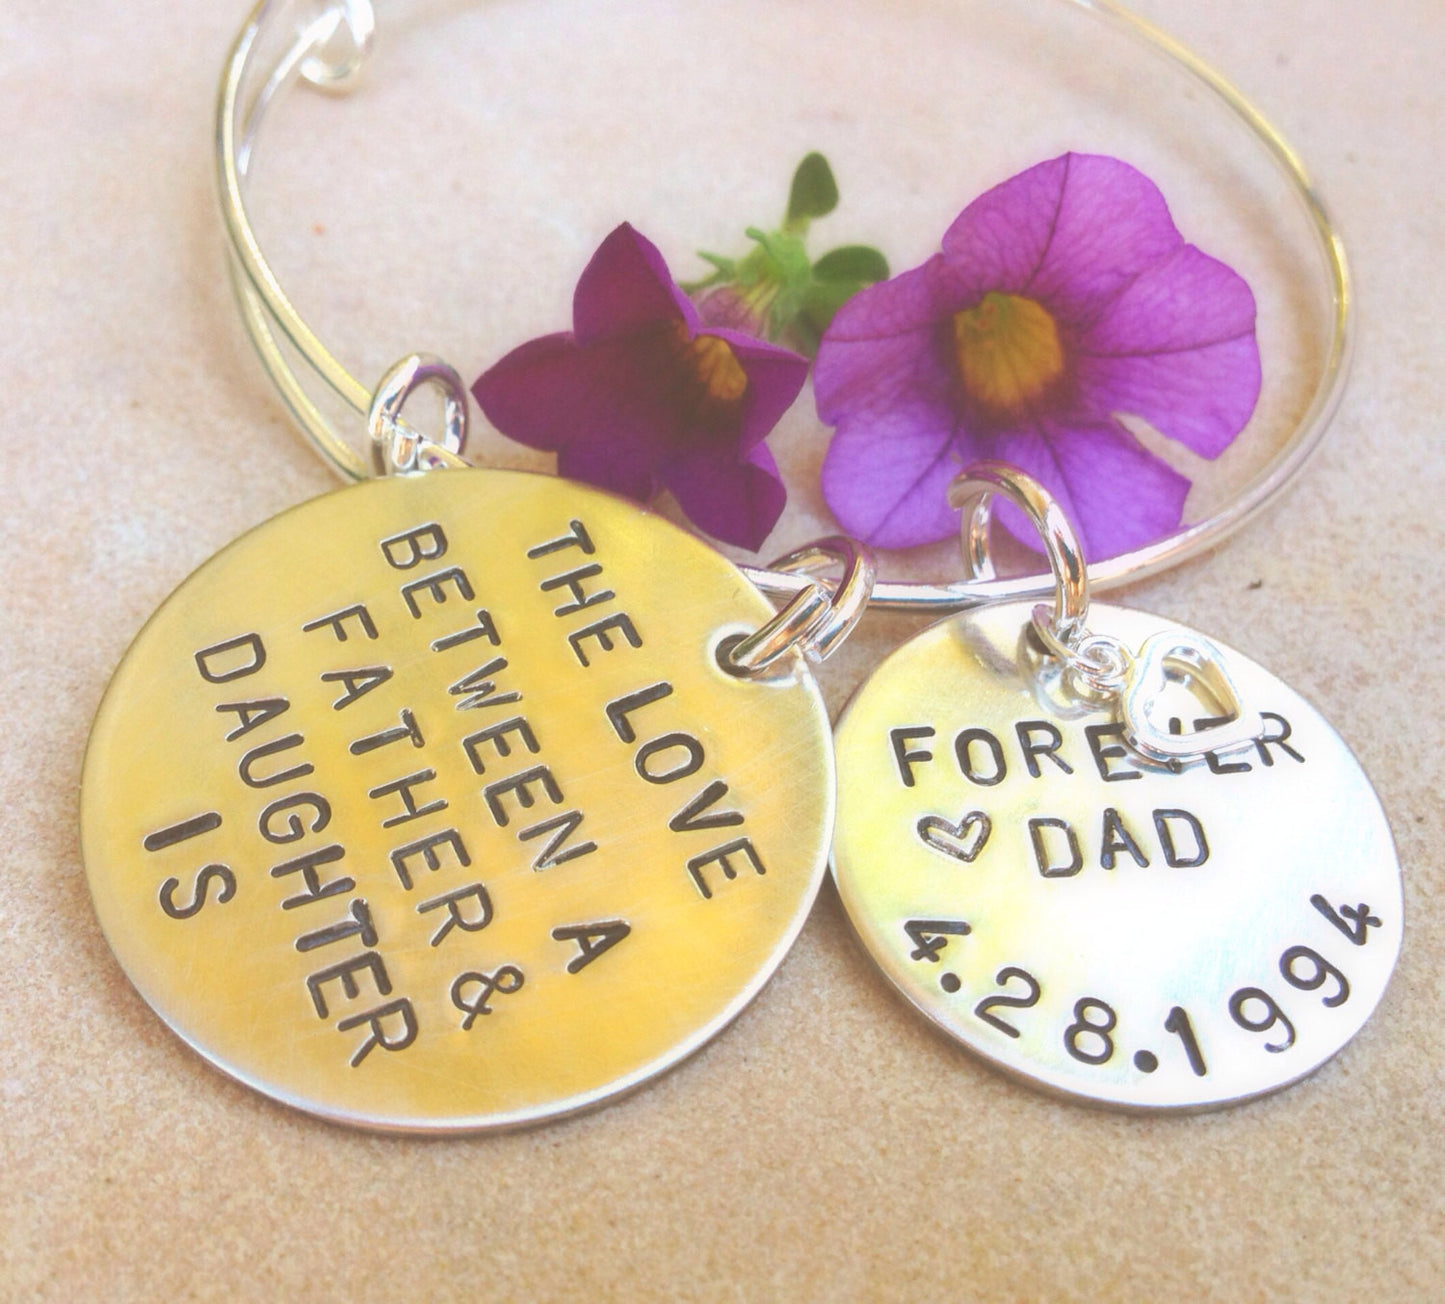 The Love Between A Father And Daughter Bangle Bracelet, Father Daughter Jewelry Gifts - Natashaaloha, jewelry, bracelets, necklace, keychains, fishing lures, gifts for men, charms, personalized, 